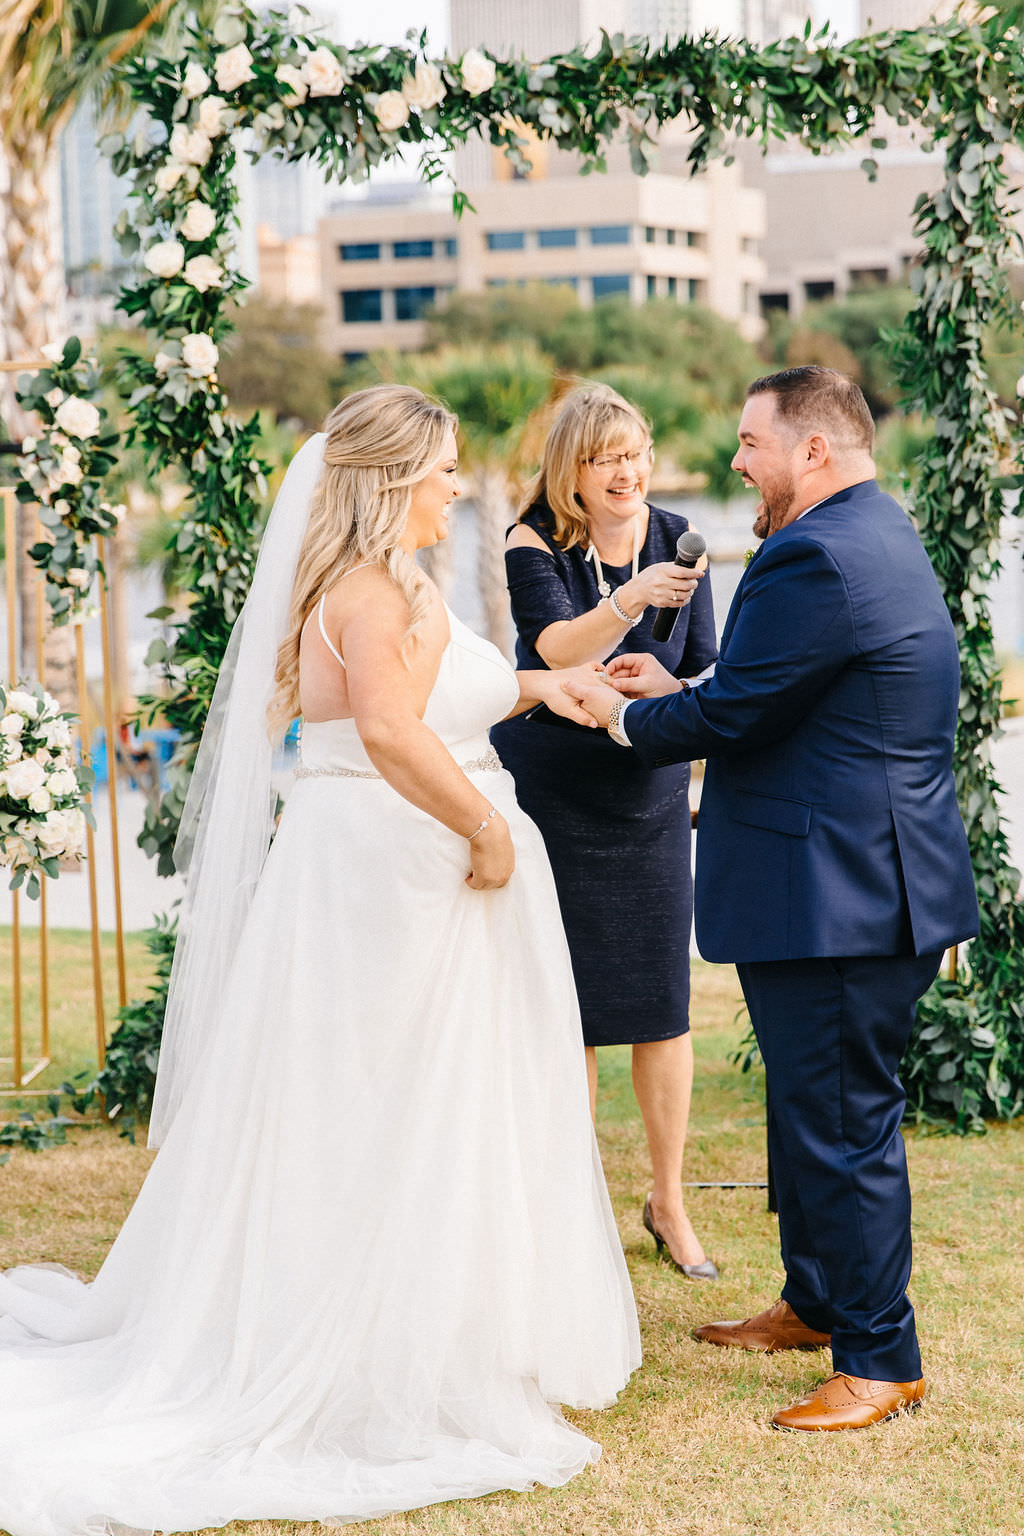 Tampa Bay Bride and Groom Exchange Vows in Outdoor Waterfront Ceremony, Garden Inspired Decor with Greenery Arch and White, Ivory and Blush Pink Florals | Florida Wedding Planner UNIQUE Weddings and Events